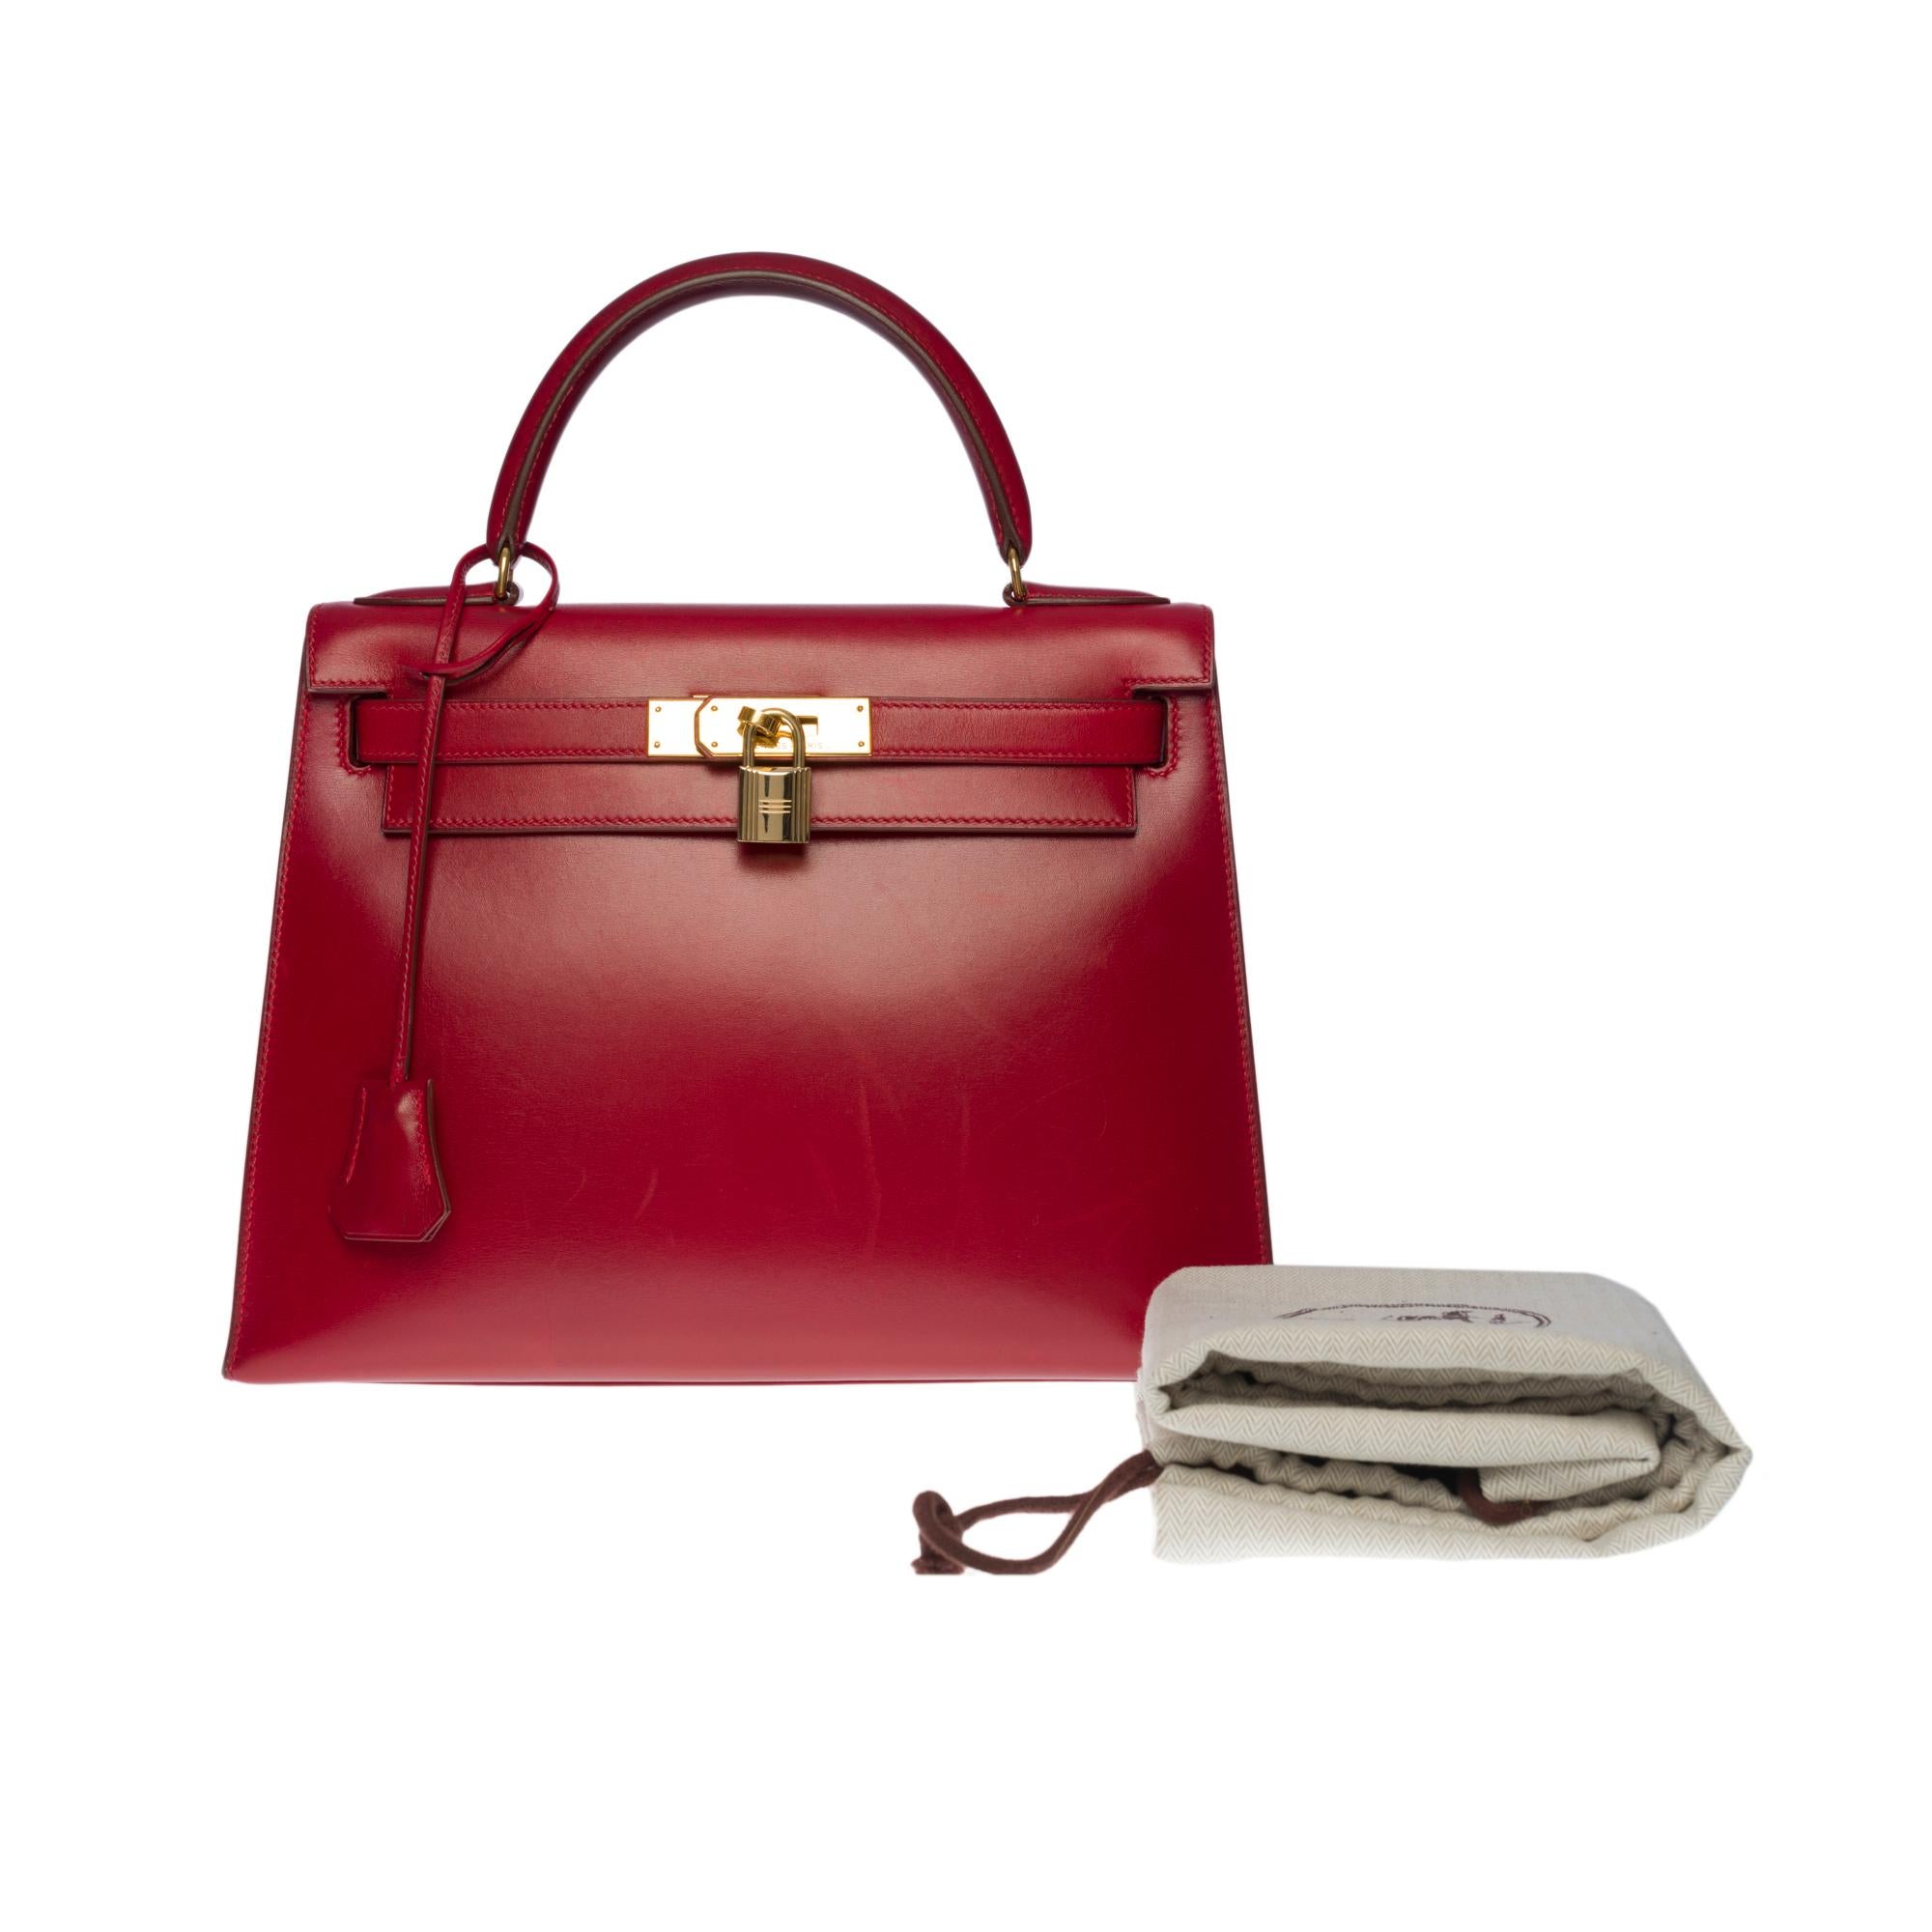 Exceptional Hermes Kelly 28 sellier handbag in Rouge H box calfskin leather, GHW 3